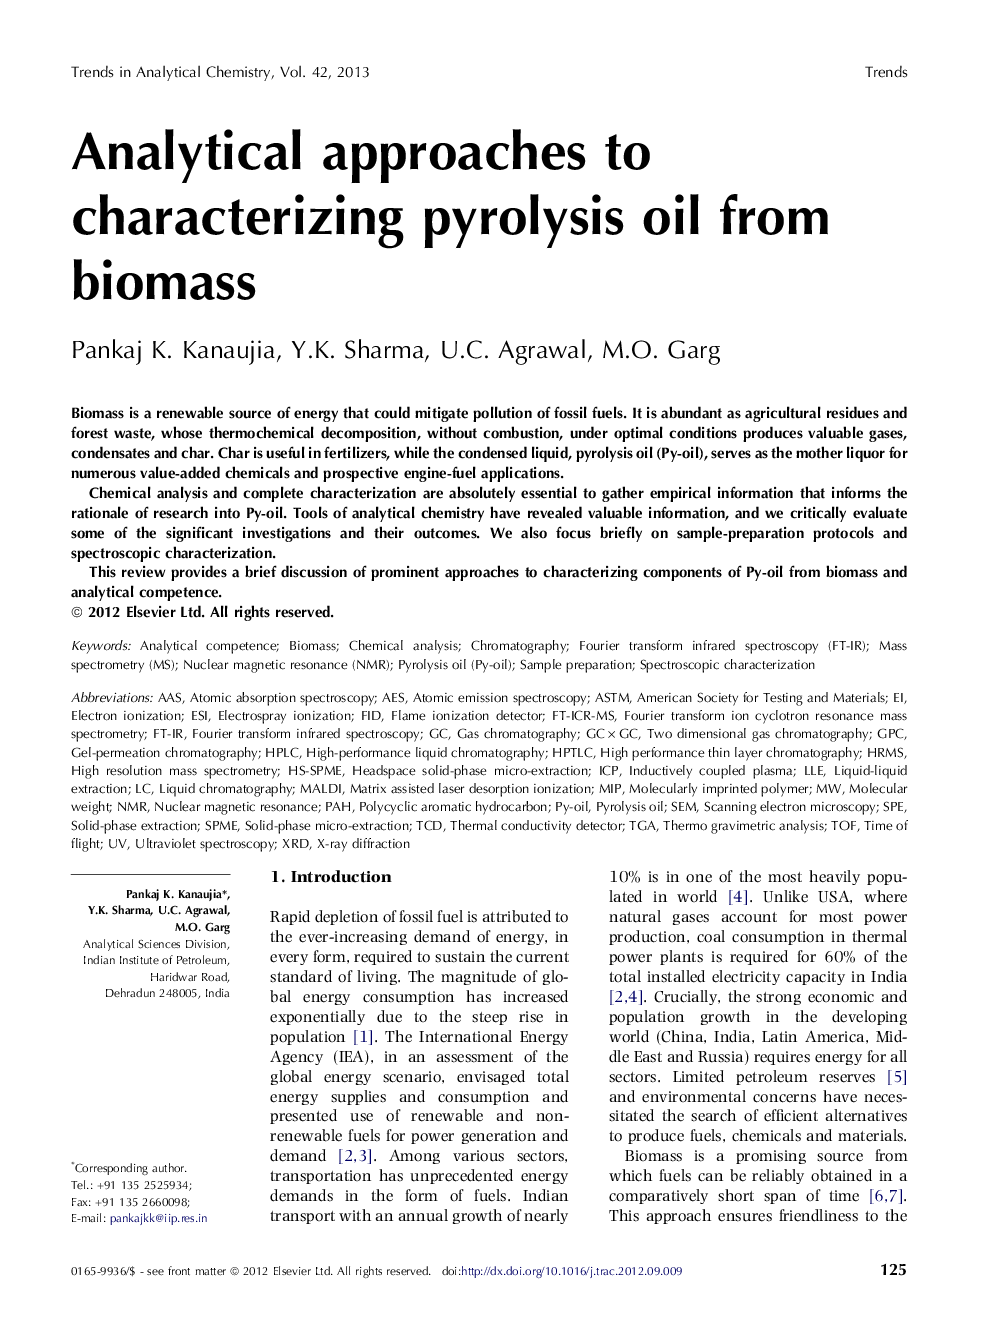 Analytical approaches to characterizing pyrolysis oil from biomass